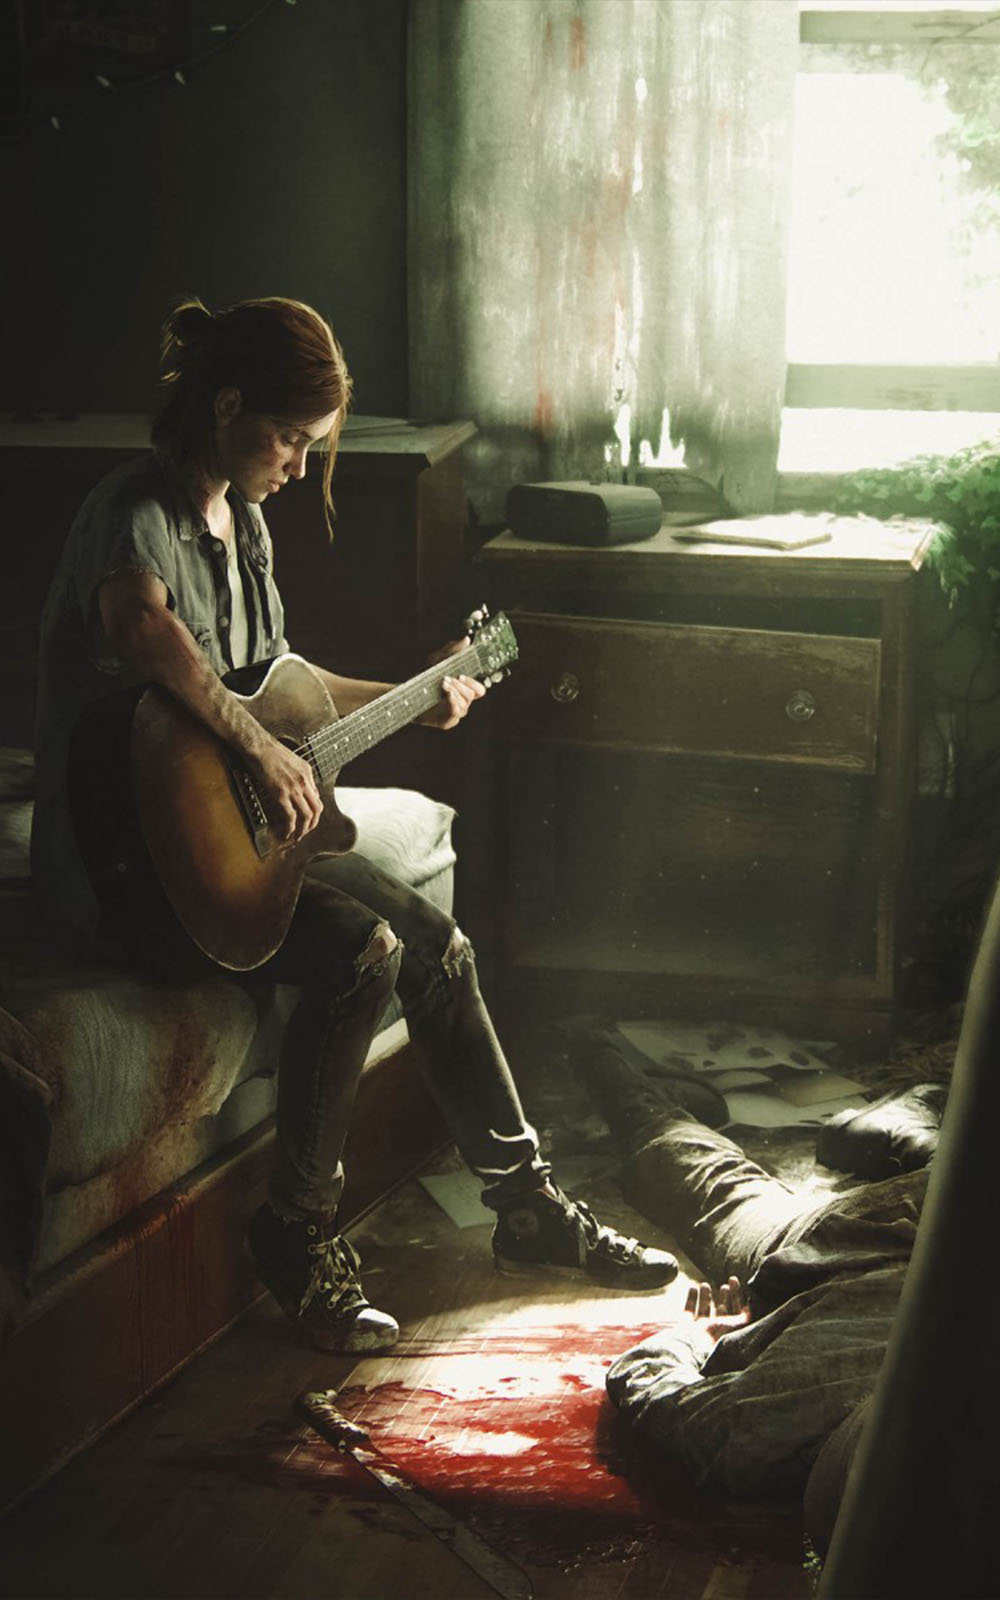 327726 Ellie The Last of Us Part 2 4k  Rare Gallery HD Wallpapers